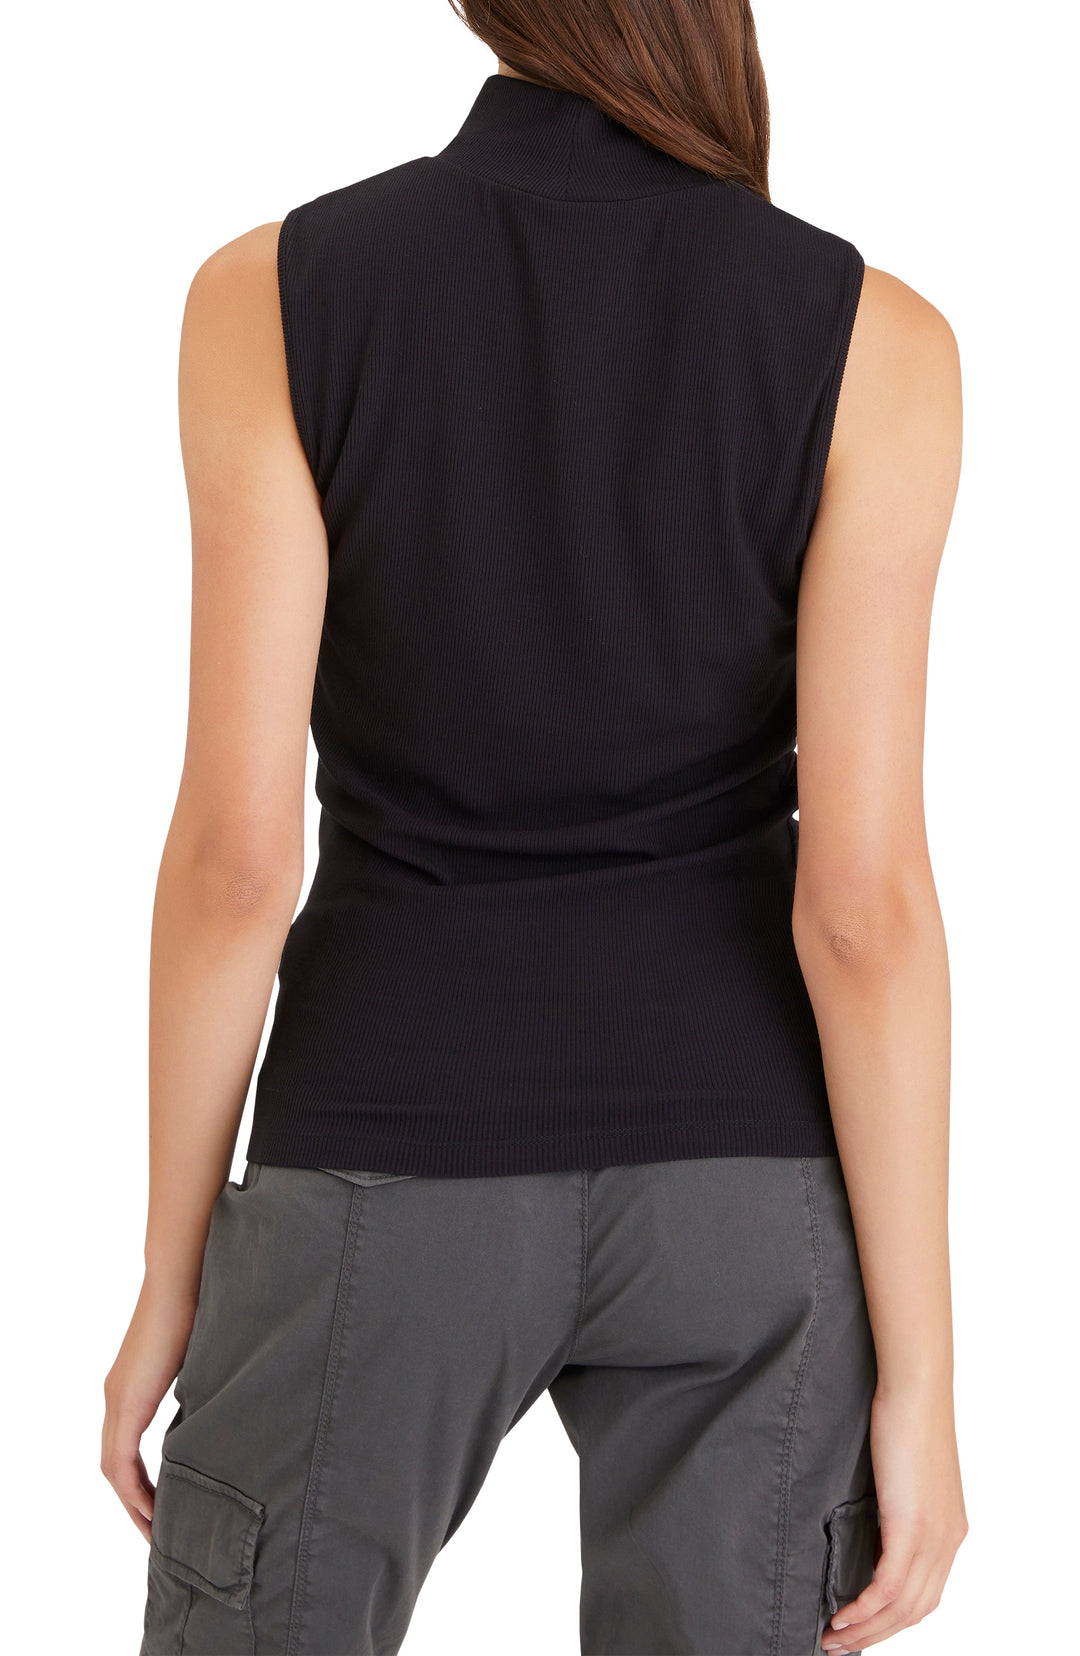 ESSENTIAL SLEEVELESS MOCK NECK - Kingfisher Road - Online Boutique